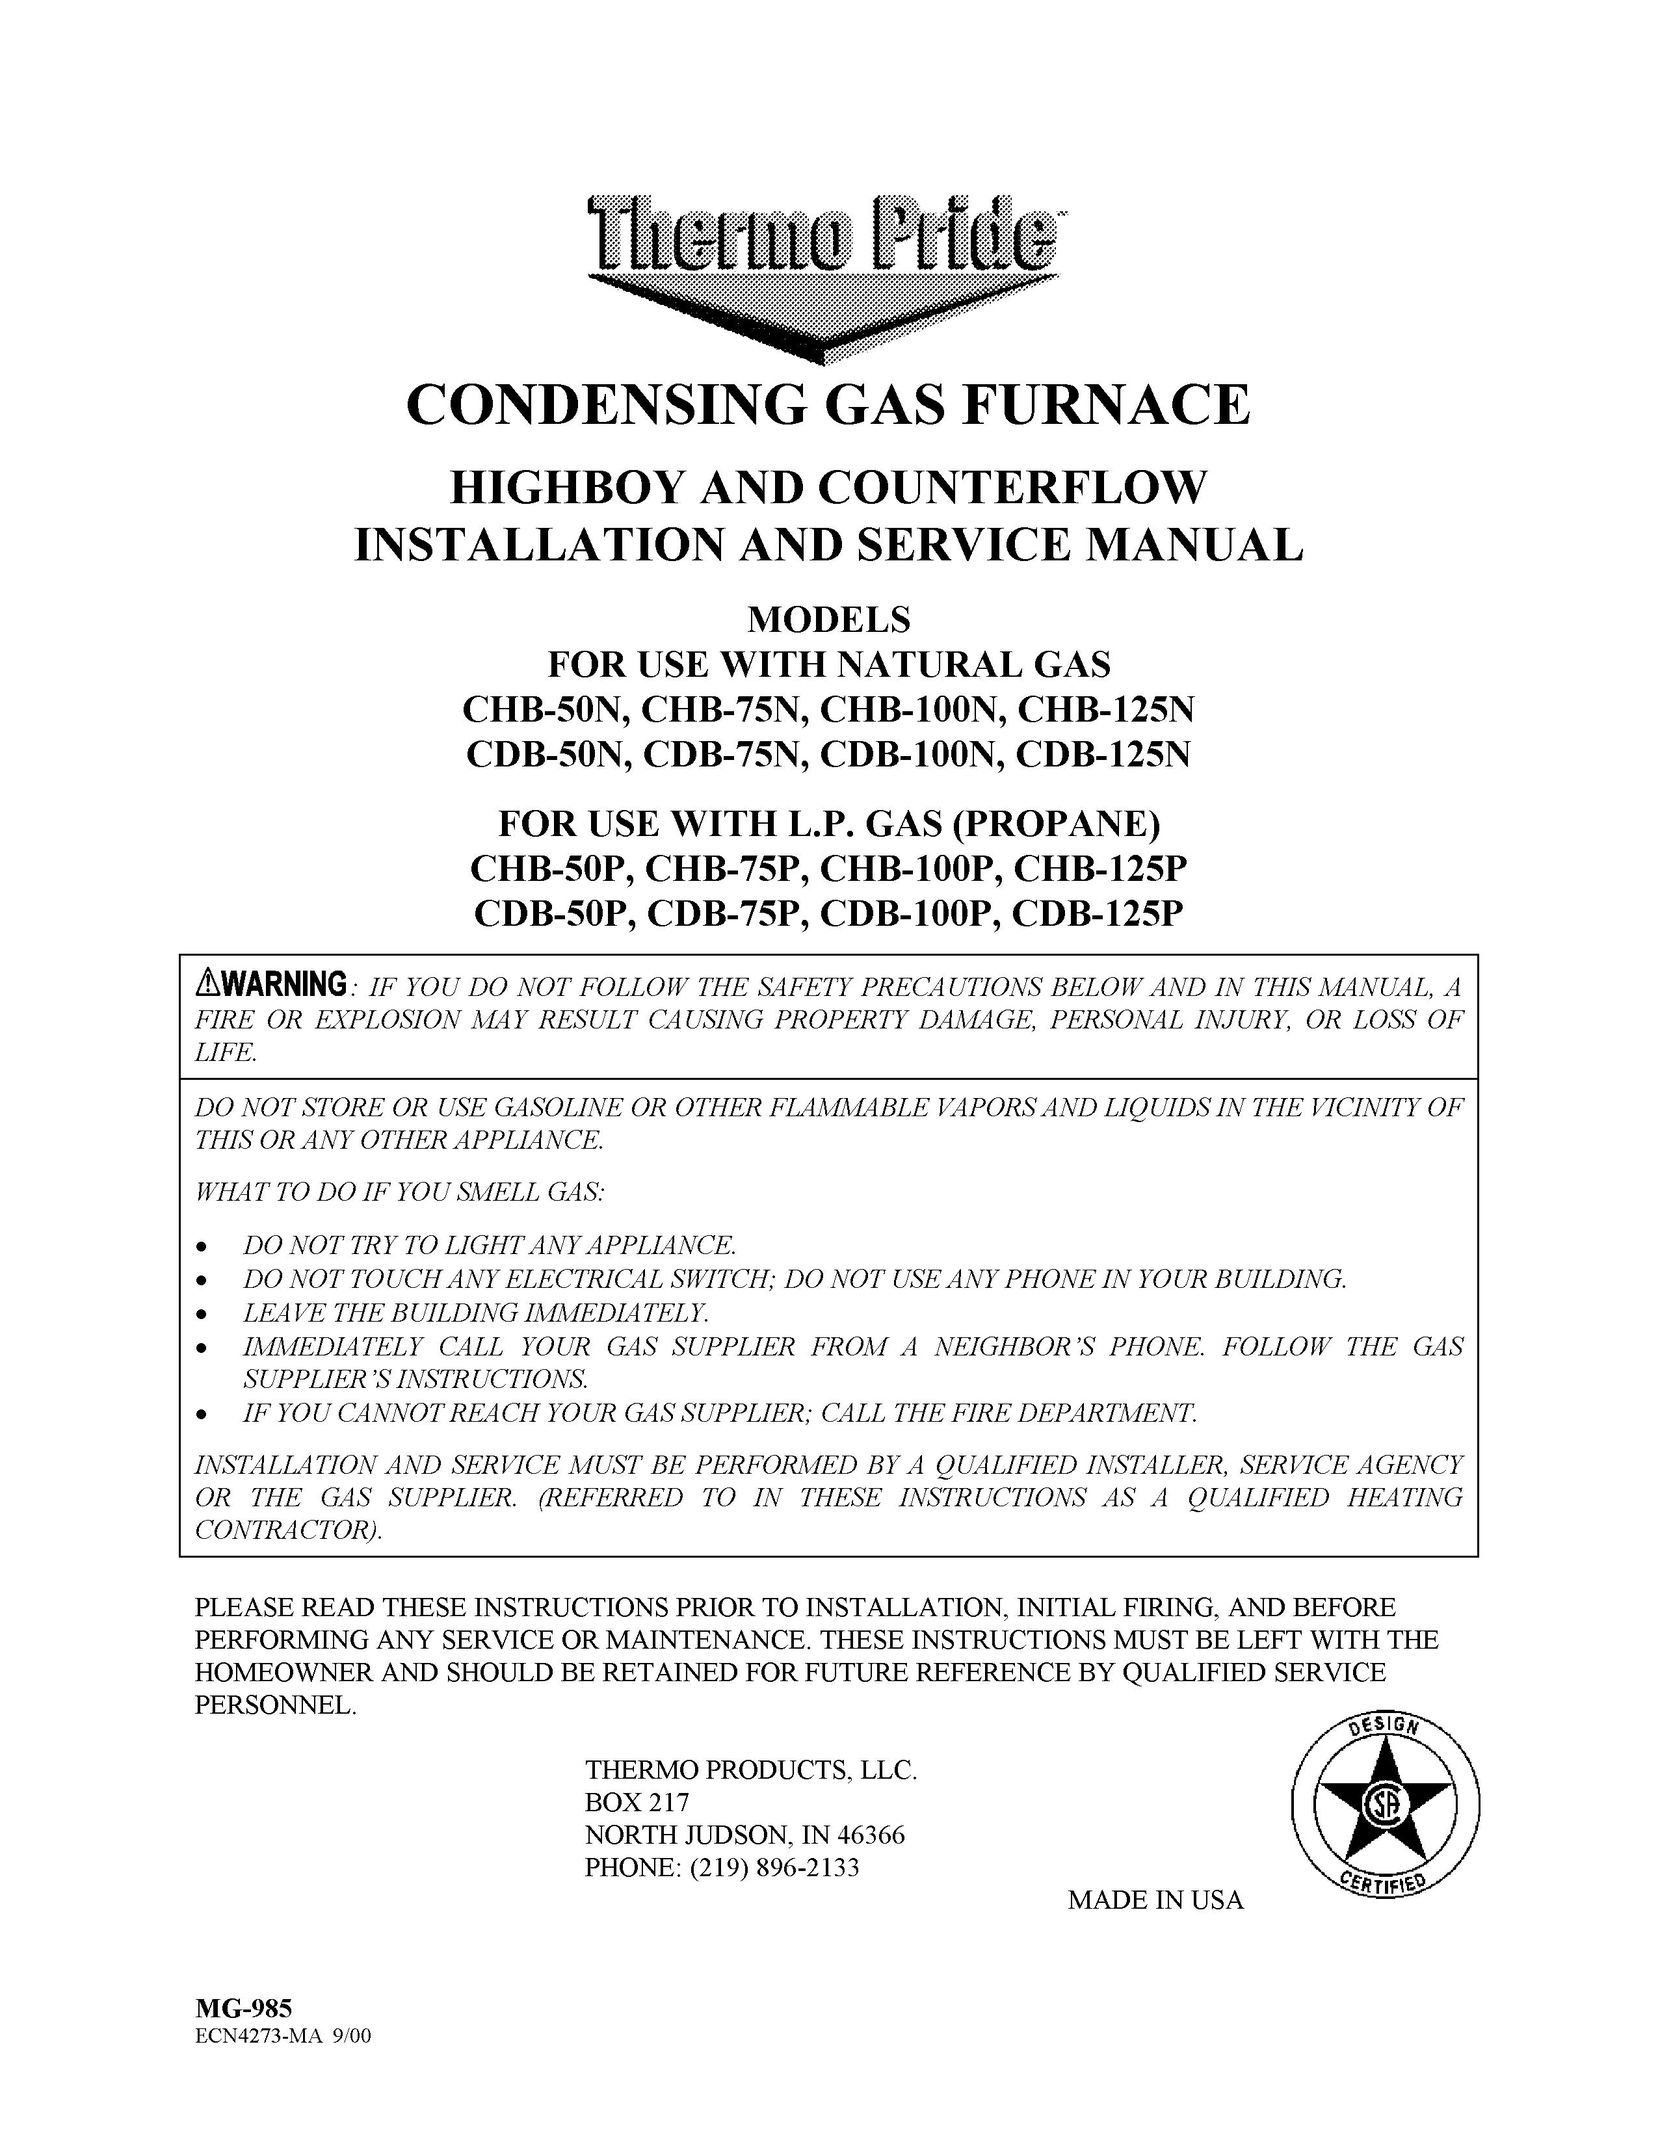 Thermo Products CHB-100N Furnace User Manual